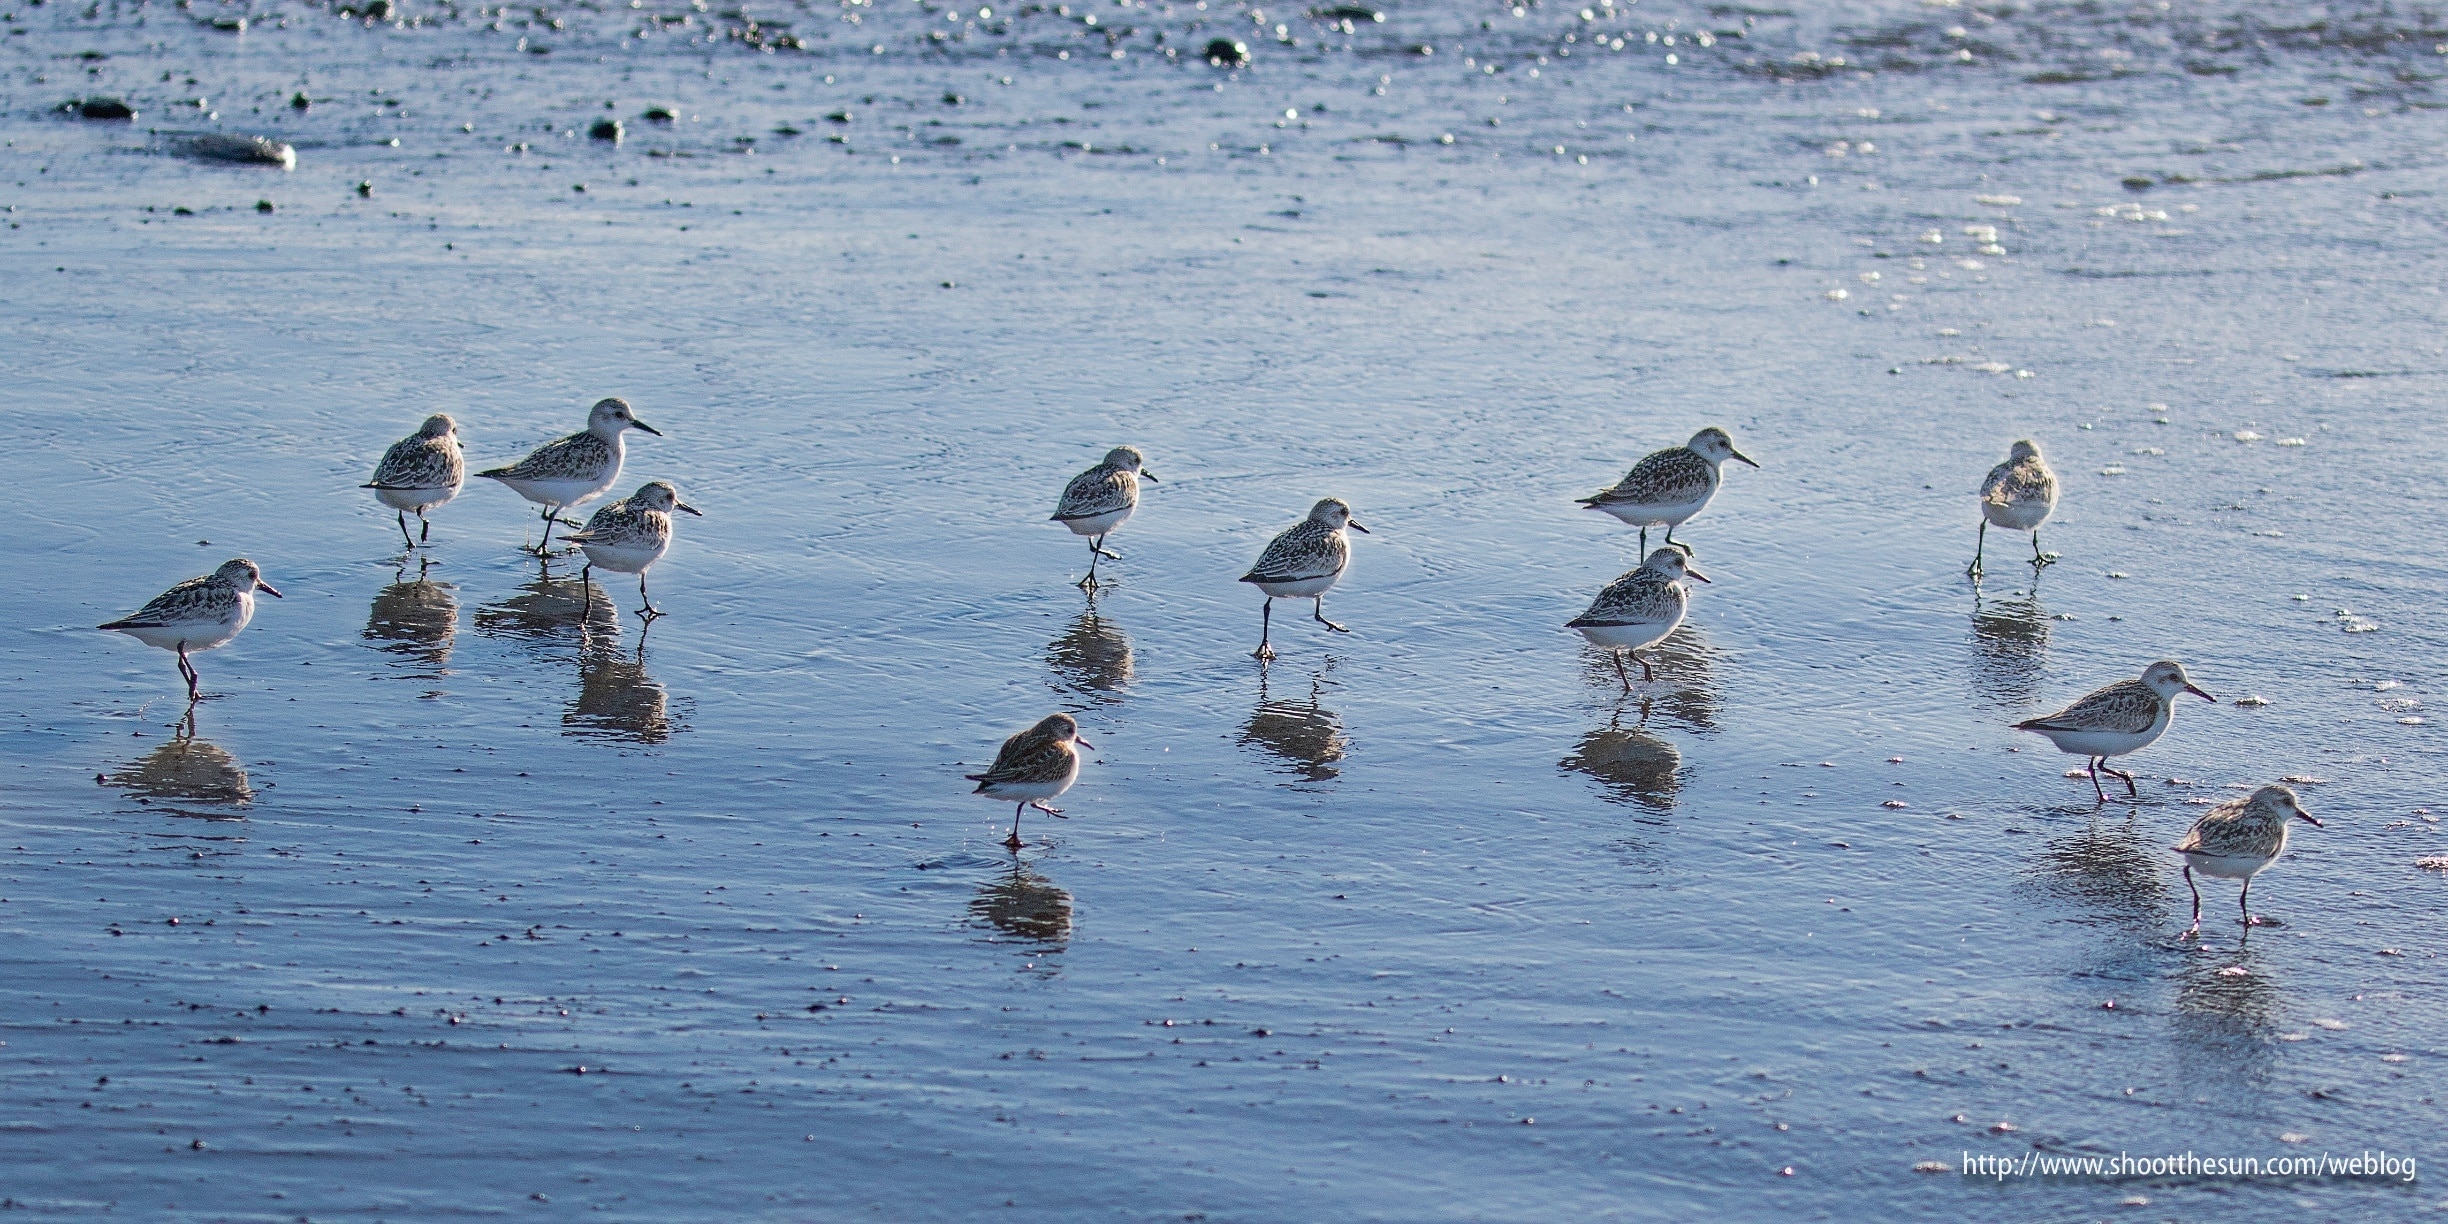 A gang of Sanderlings heading out towards the water to pluck tasty treats.

I chased this group down the spit on the way back from the lighthouse for about a half-mile.  Chase is kind of a misnomer here.  I was taking some big strides to finish the walk before the park closed at sunset, and they just happened to go along for the ride.